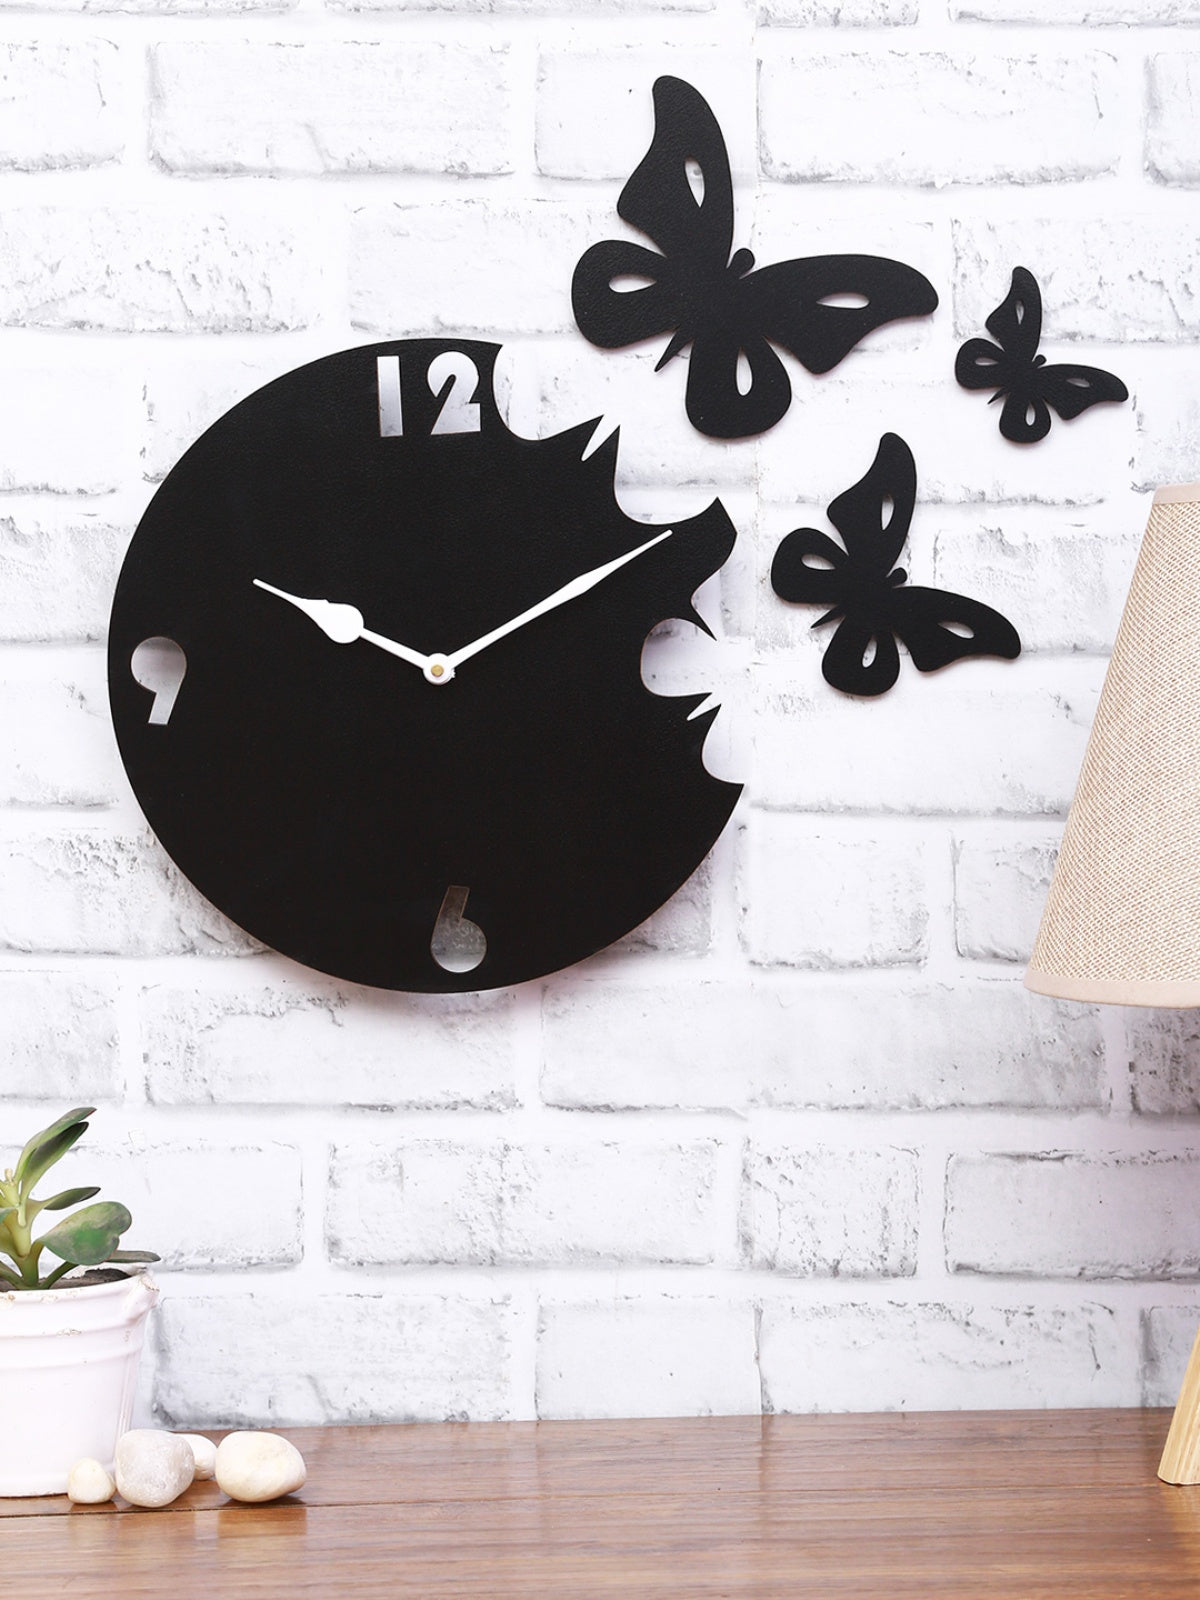 Butterfly Designer Wooden Wall Clock for Home, Black